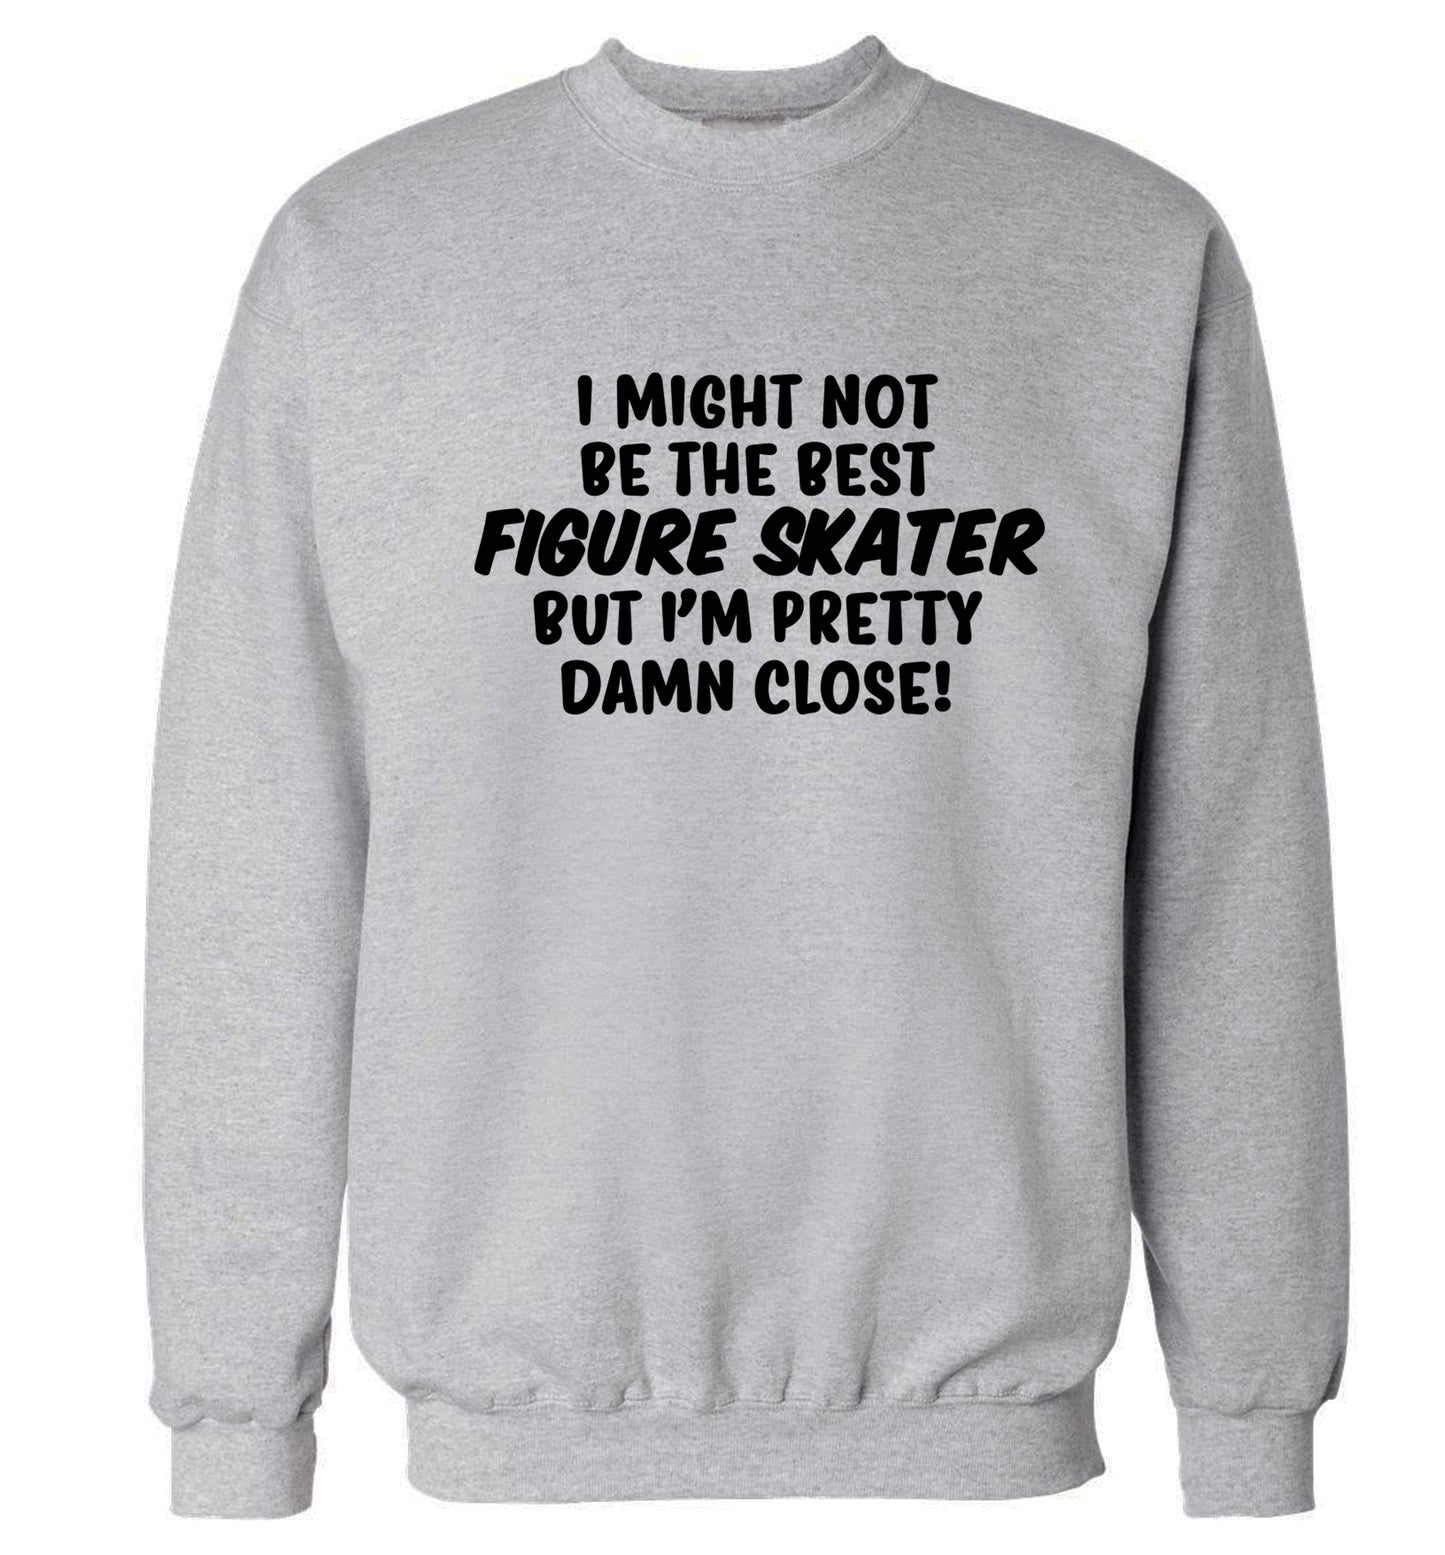 I might not be the best figure skater but I'm pretty damn close! Adult's unisexgrey Sweater 2XL